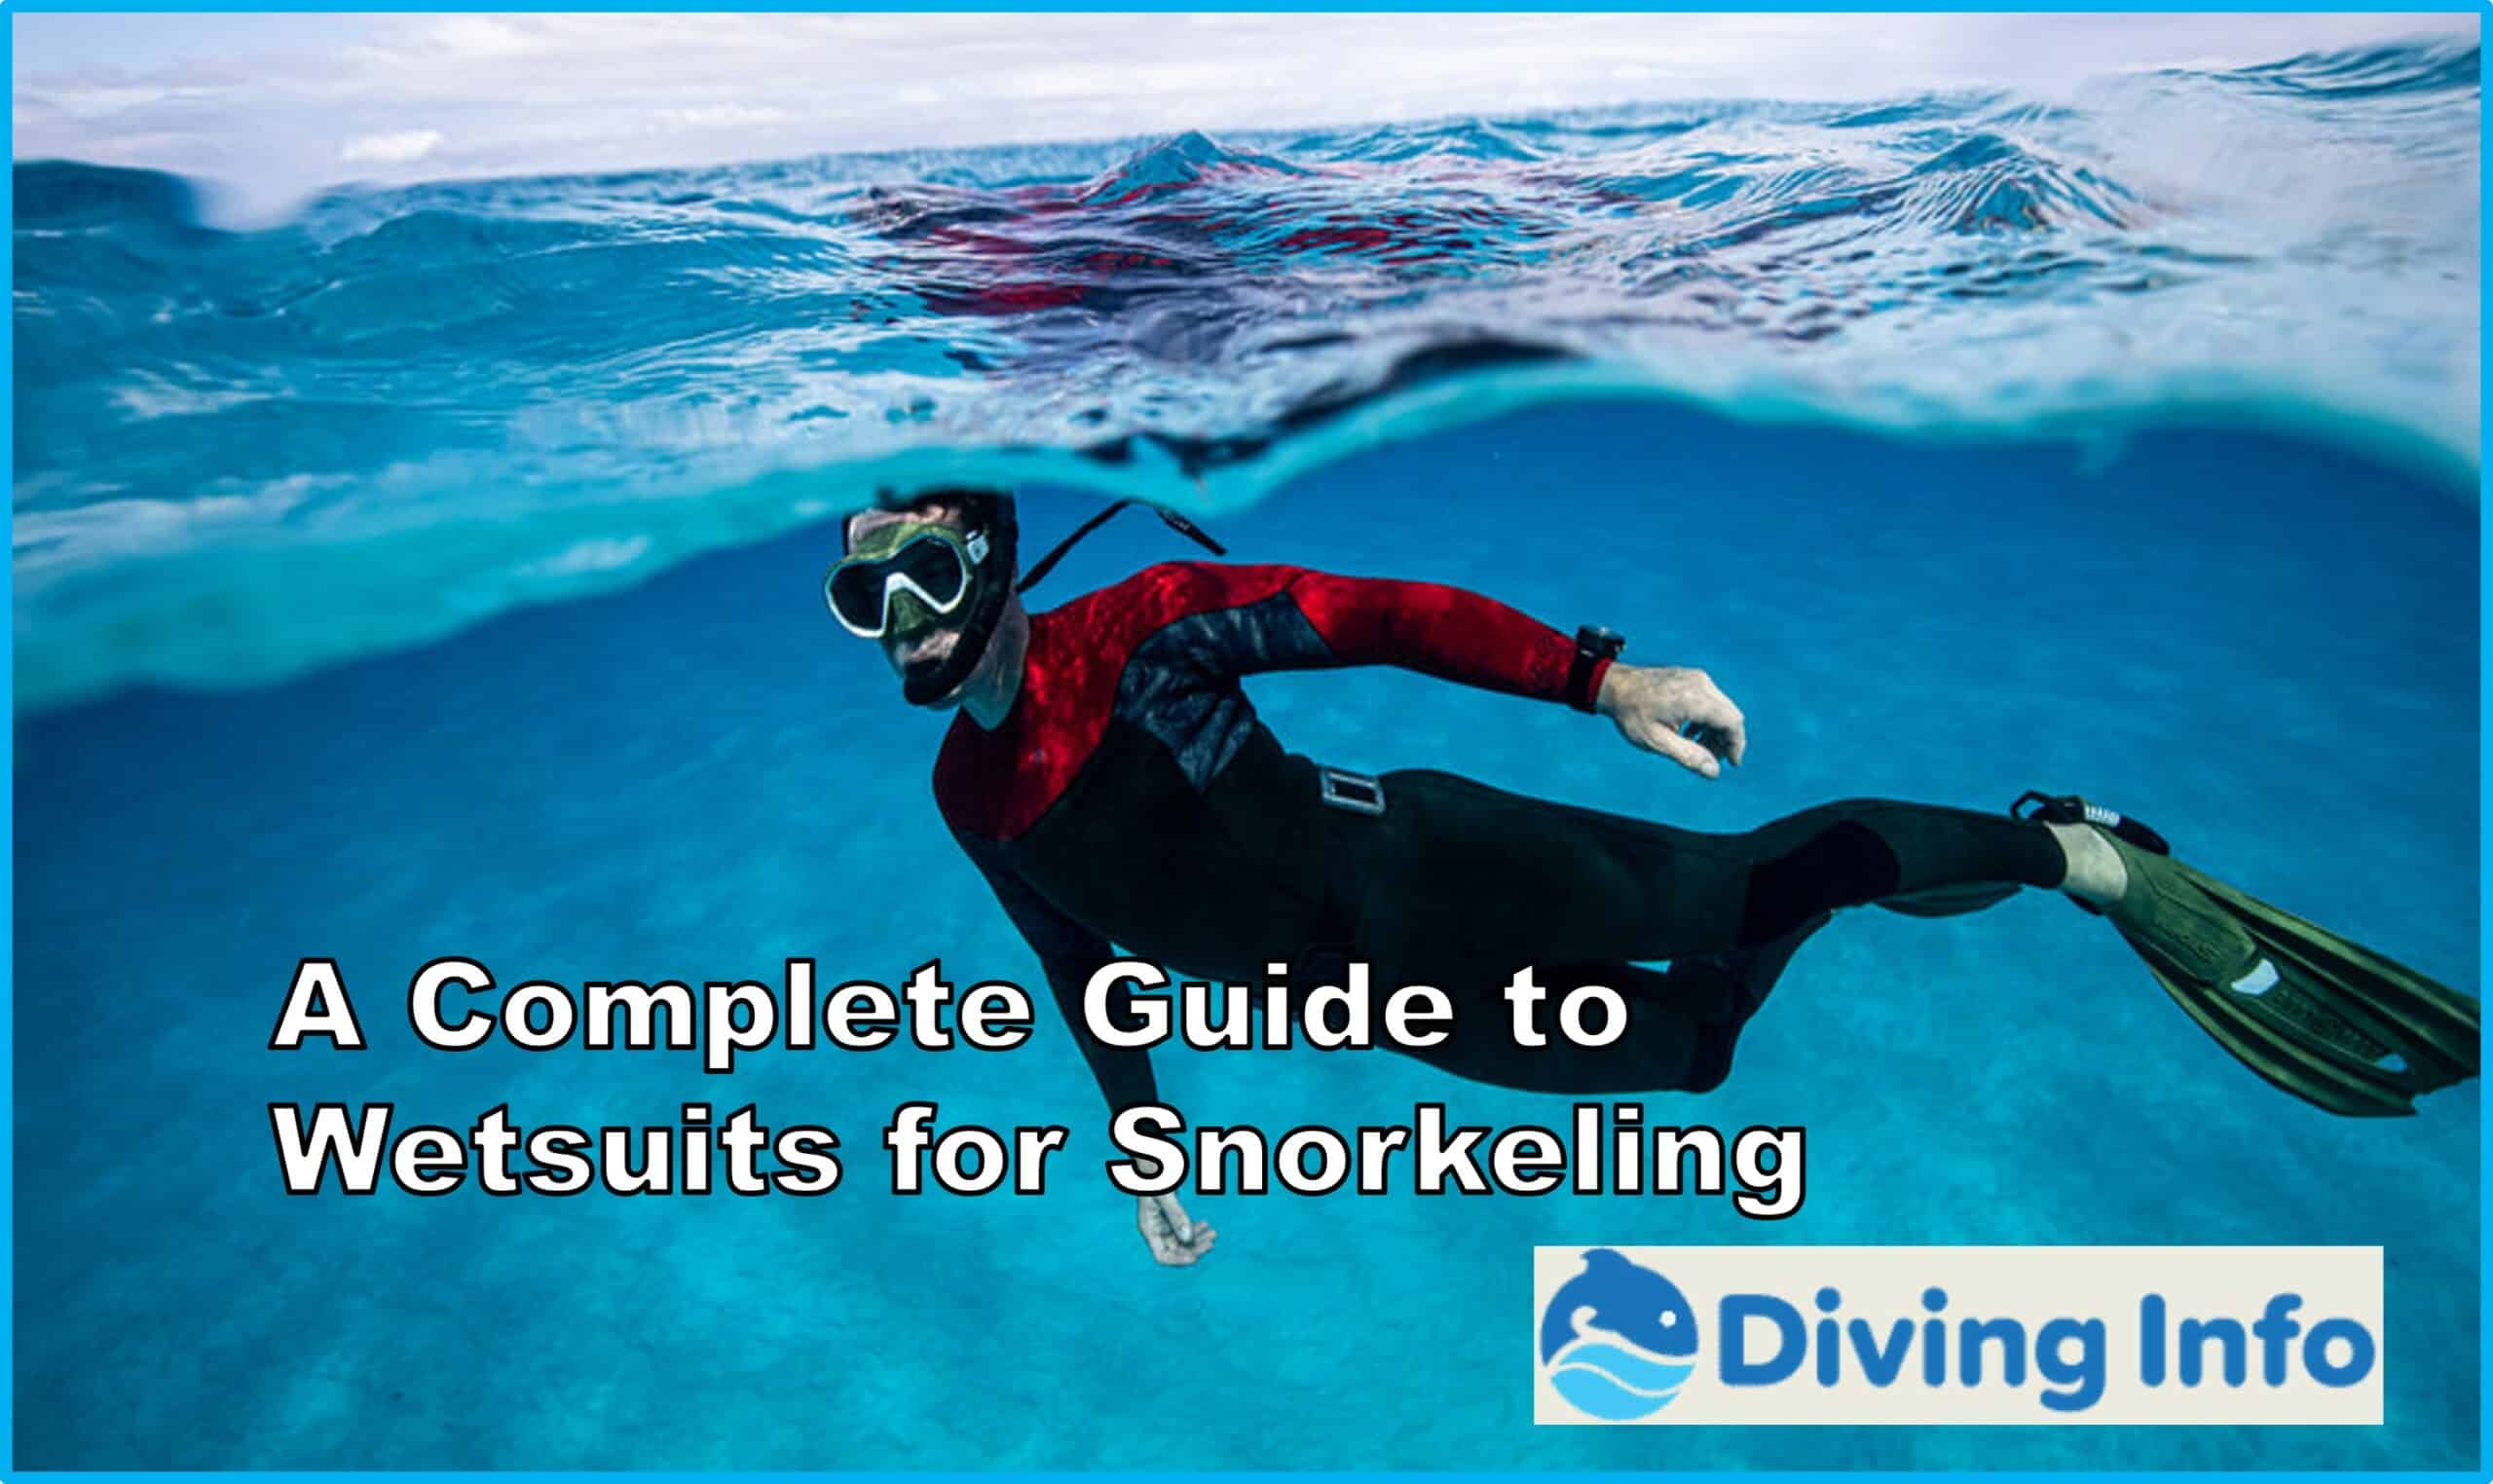 A Complete Guide to Wetsuits for Snorkeling